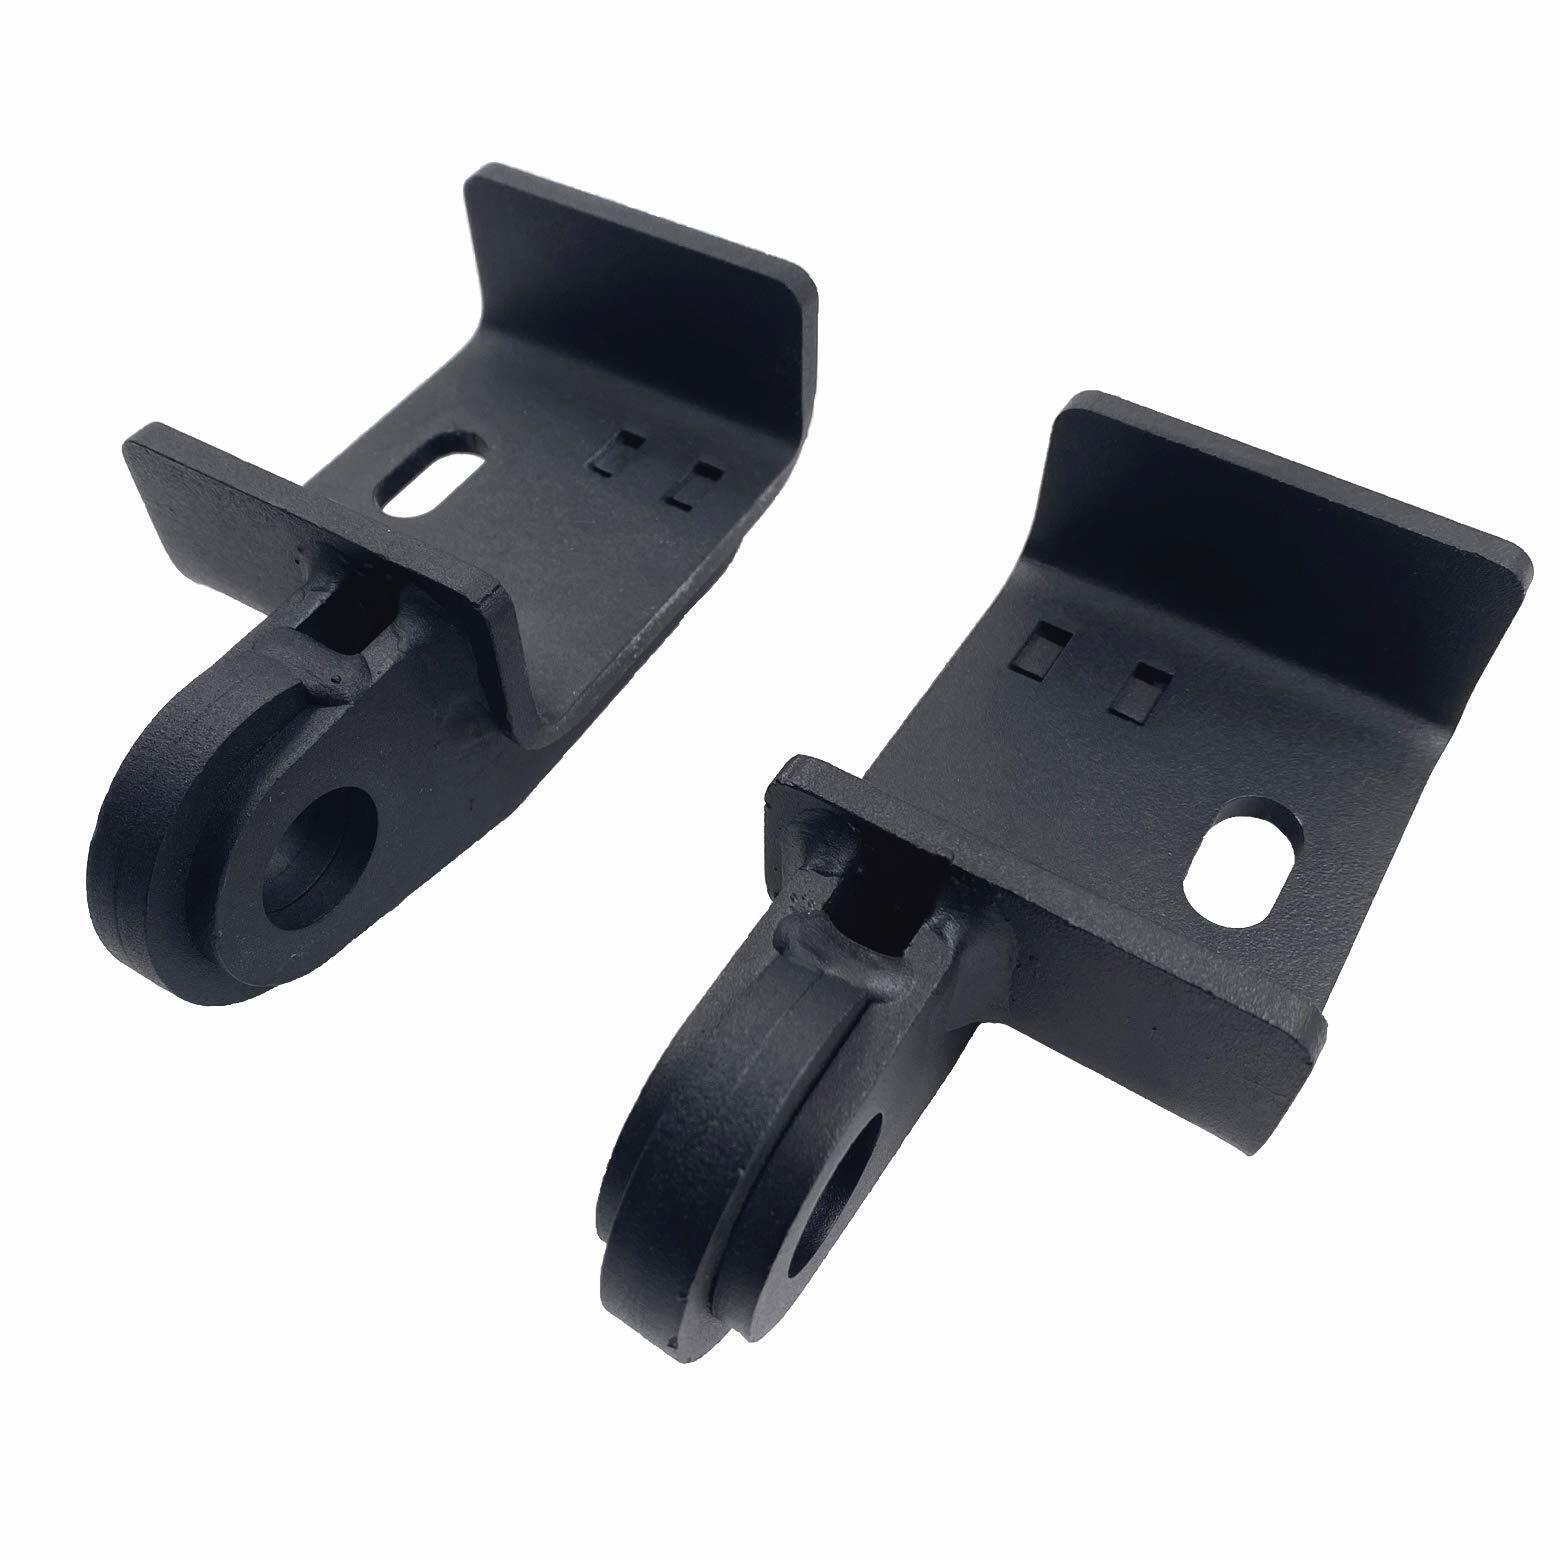 Gstpautoparts Front Demon Tow Hook Brackets D-Ring Shackles 88711 for 2009-2022 Toyota Tacoma